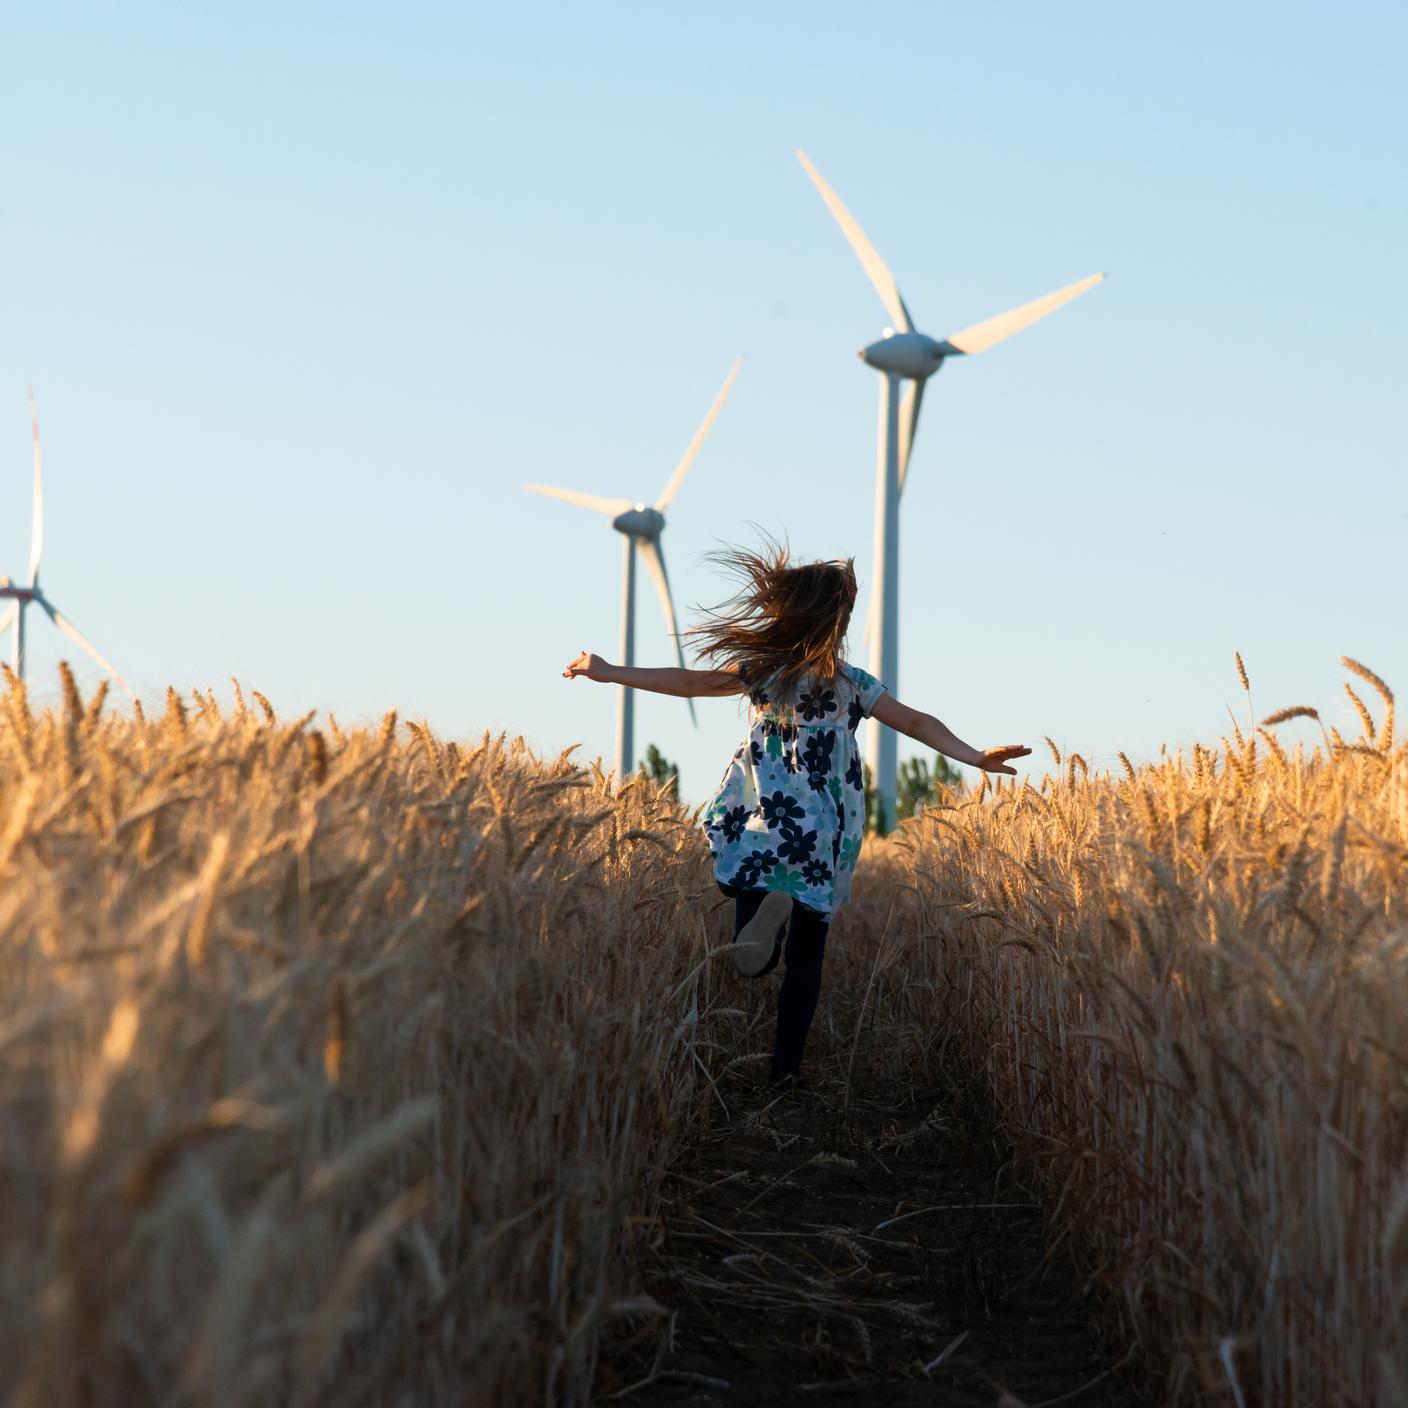 Future of energy : A little girl running in a field